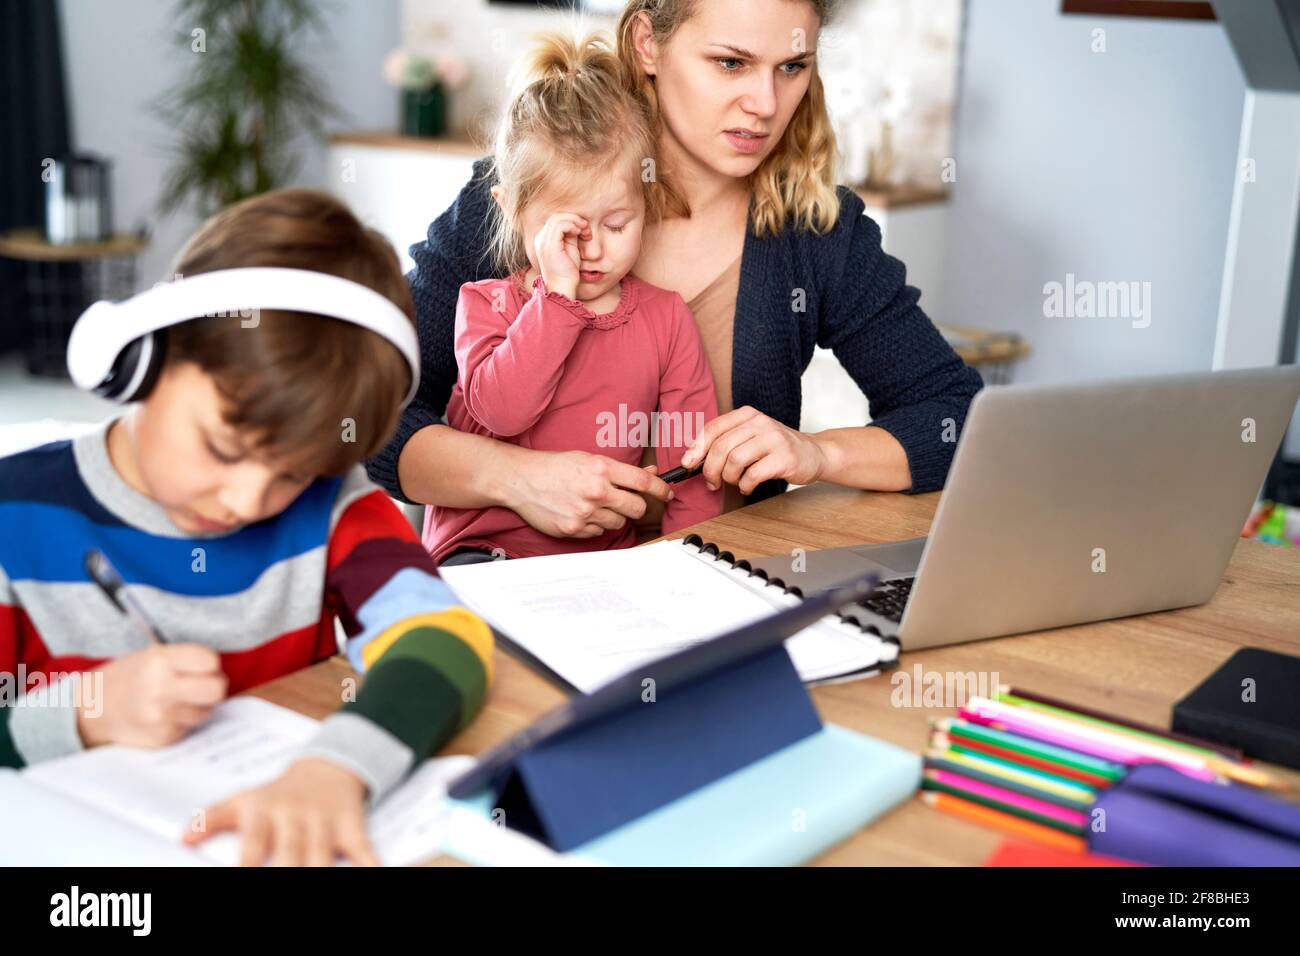 Mother trying to reconcile remote work with homeschooling Stock Photo